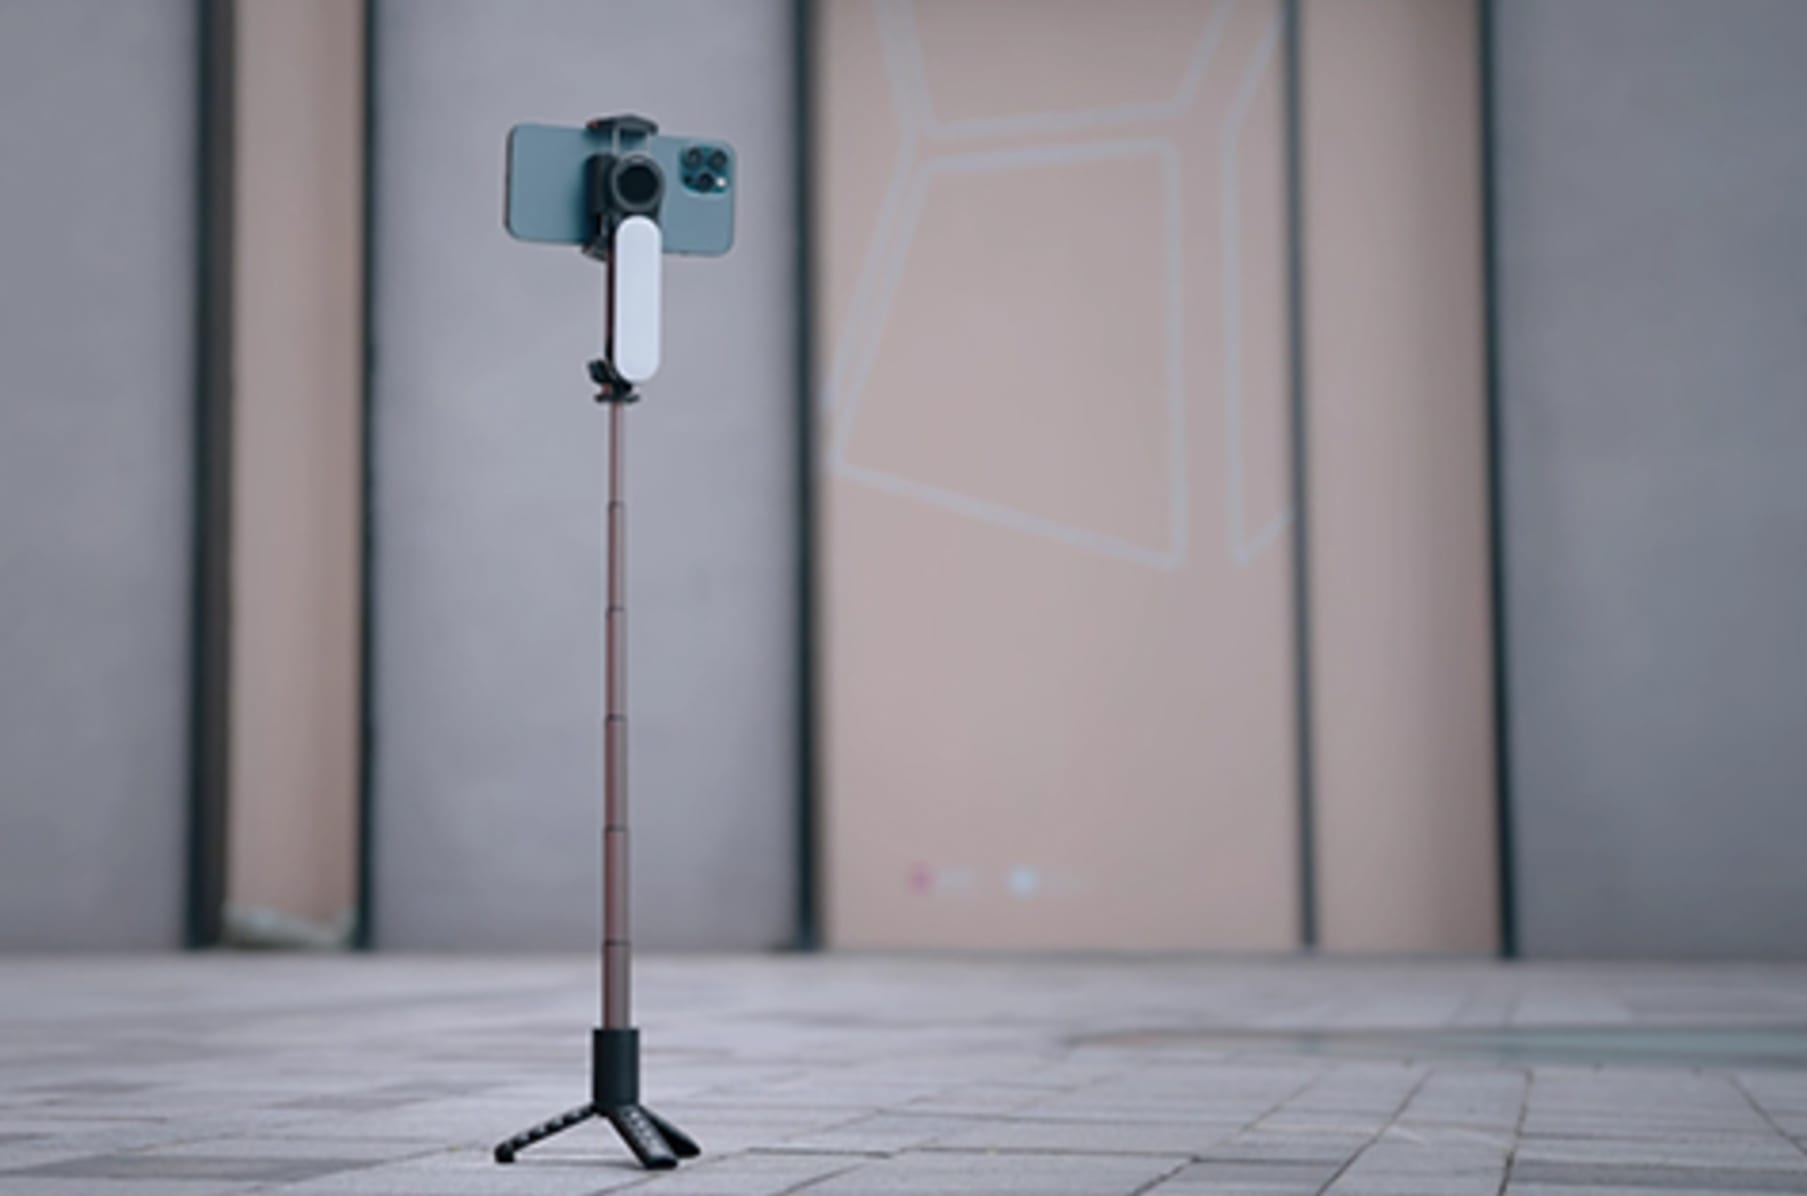 Q09: 3IN1 Gimbal Stabilizer Meets all You Need | Indiegogo